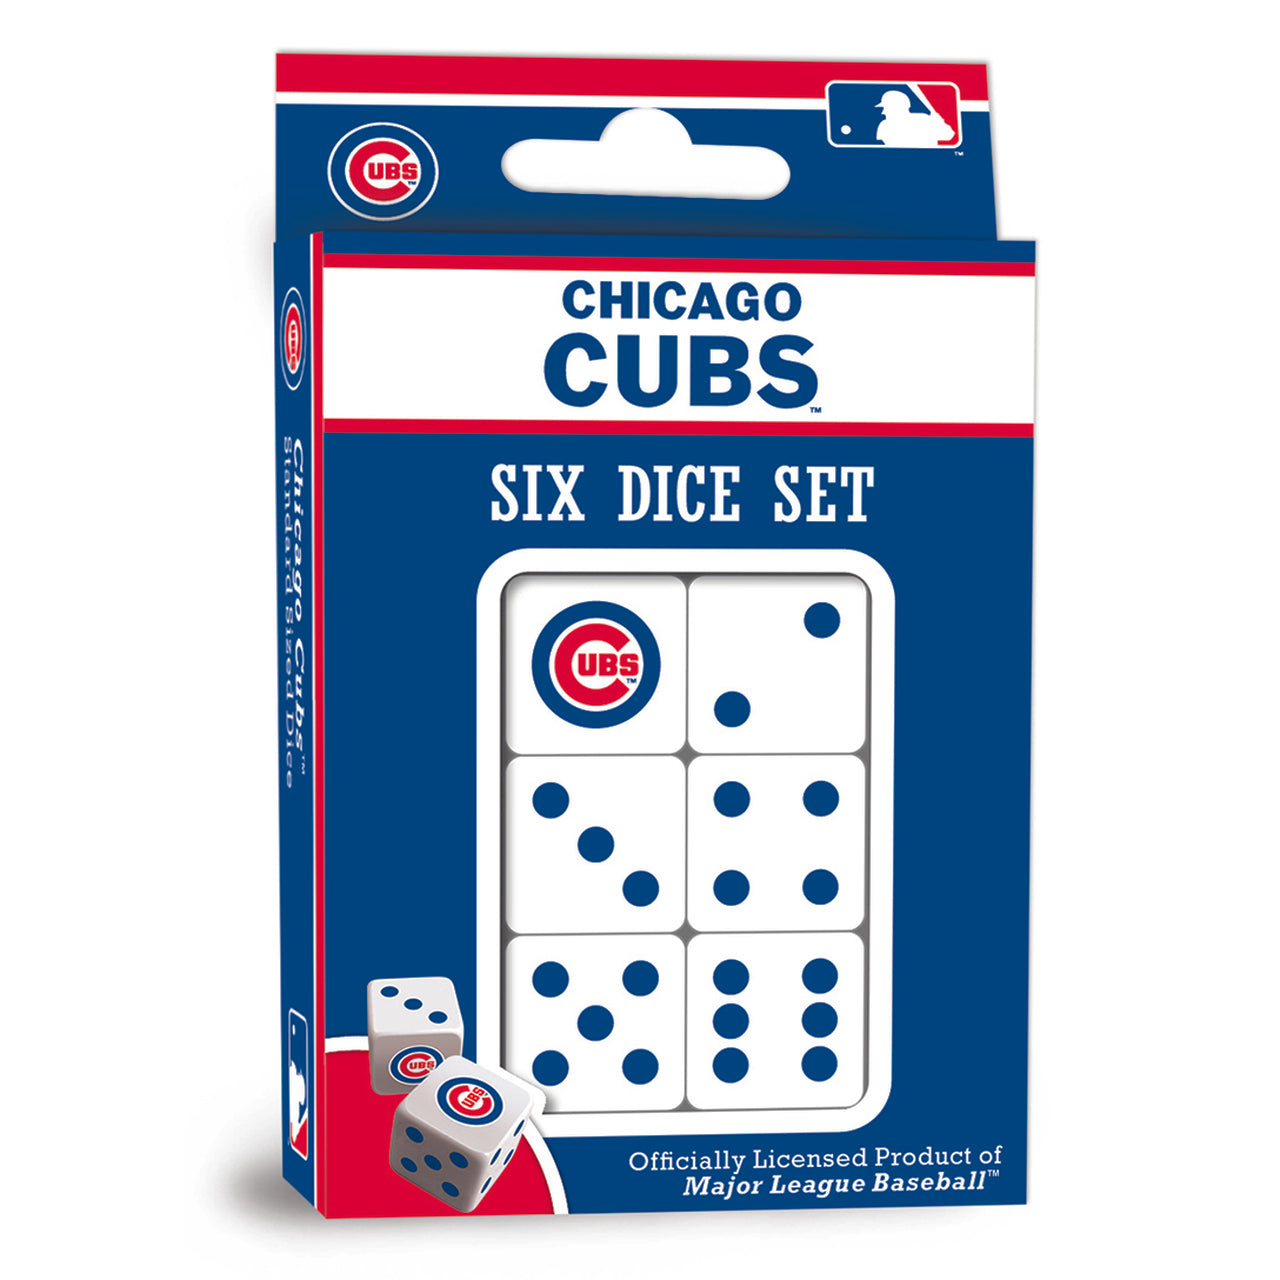 CHICAGO CUBS DICE PACK